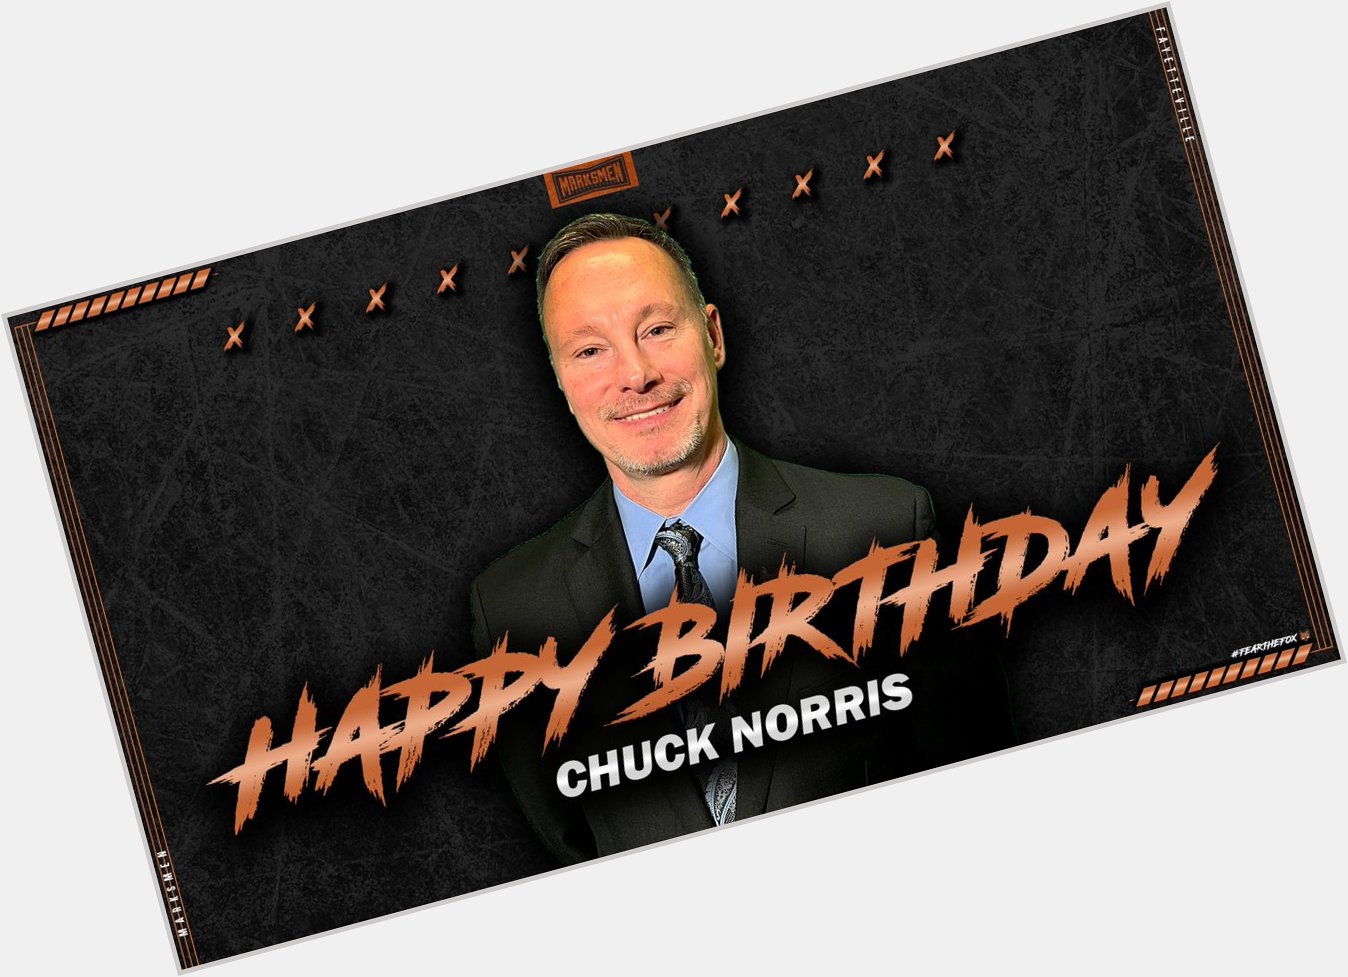 Help us in wishing our team owner, Chuck Norris, a very happy birthday! 